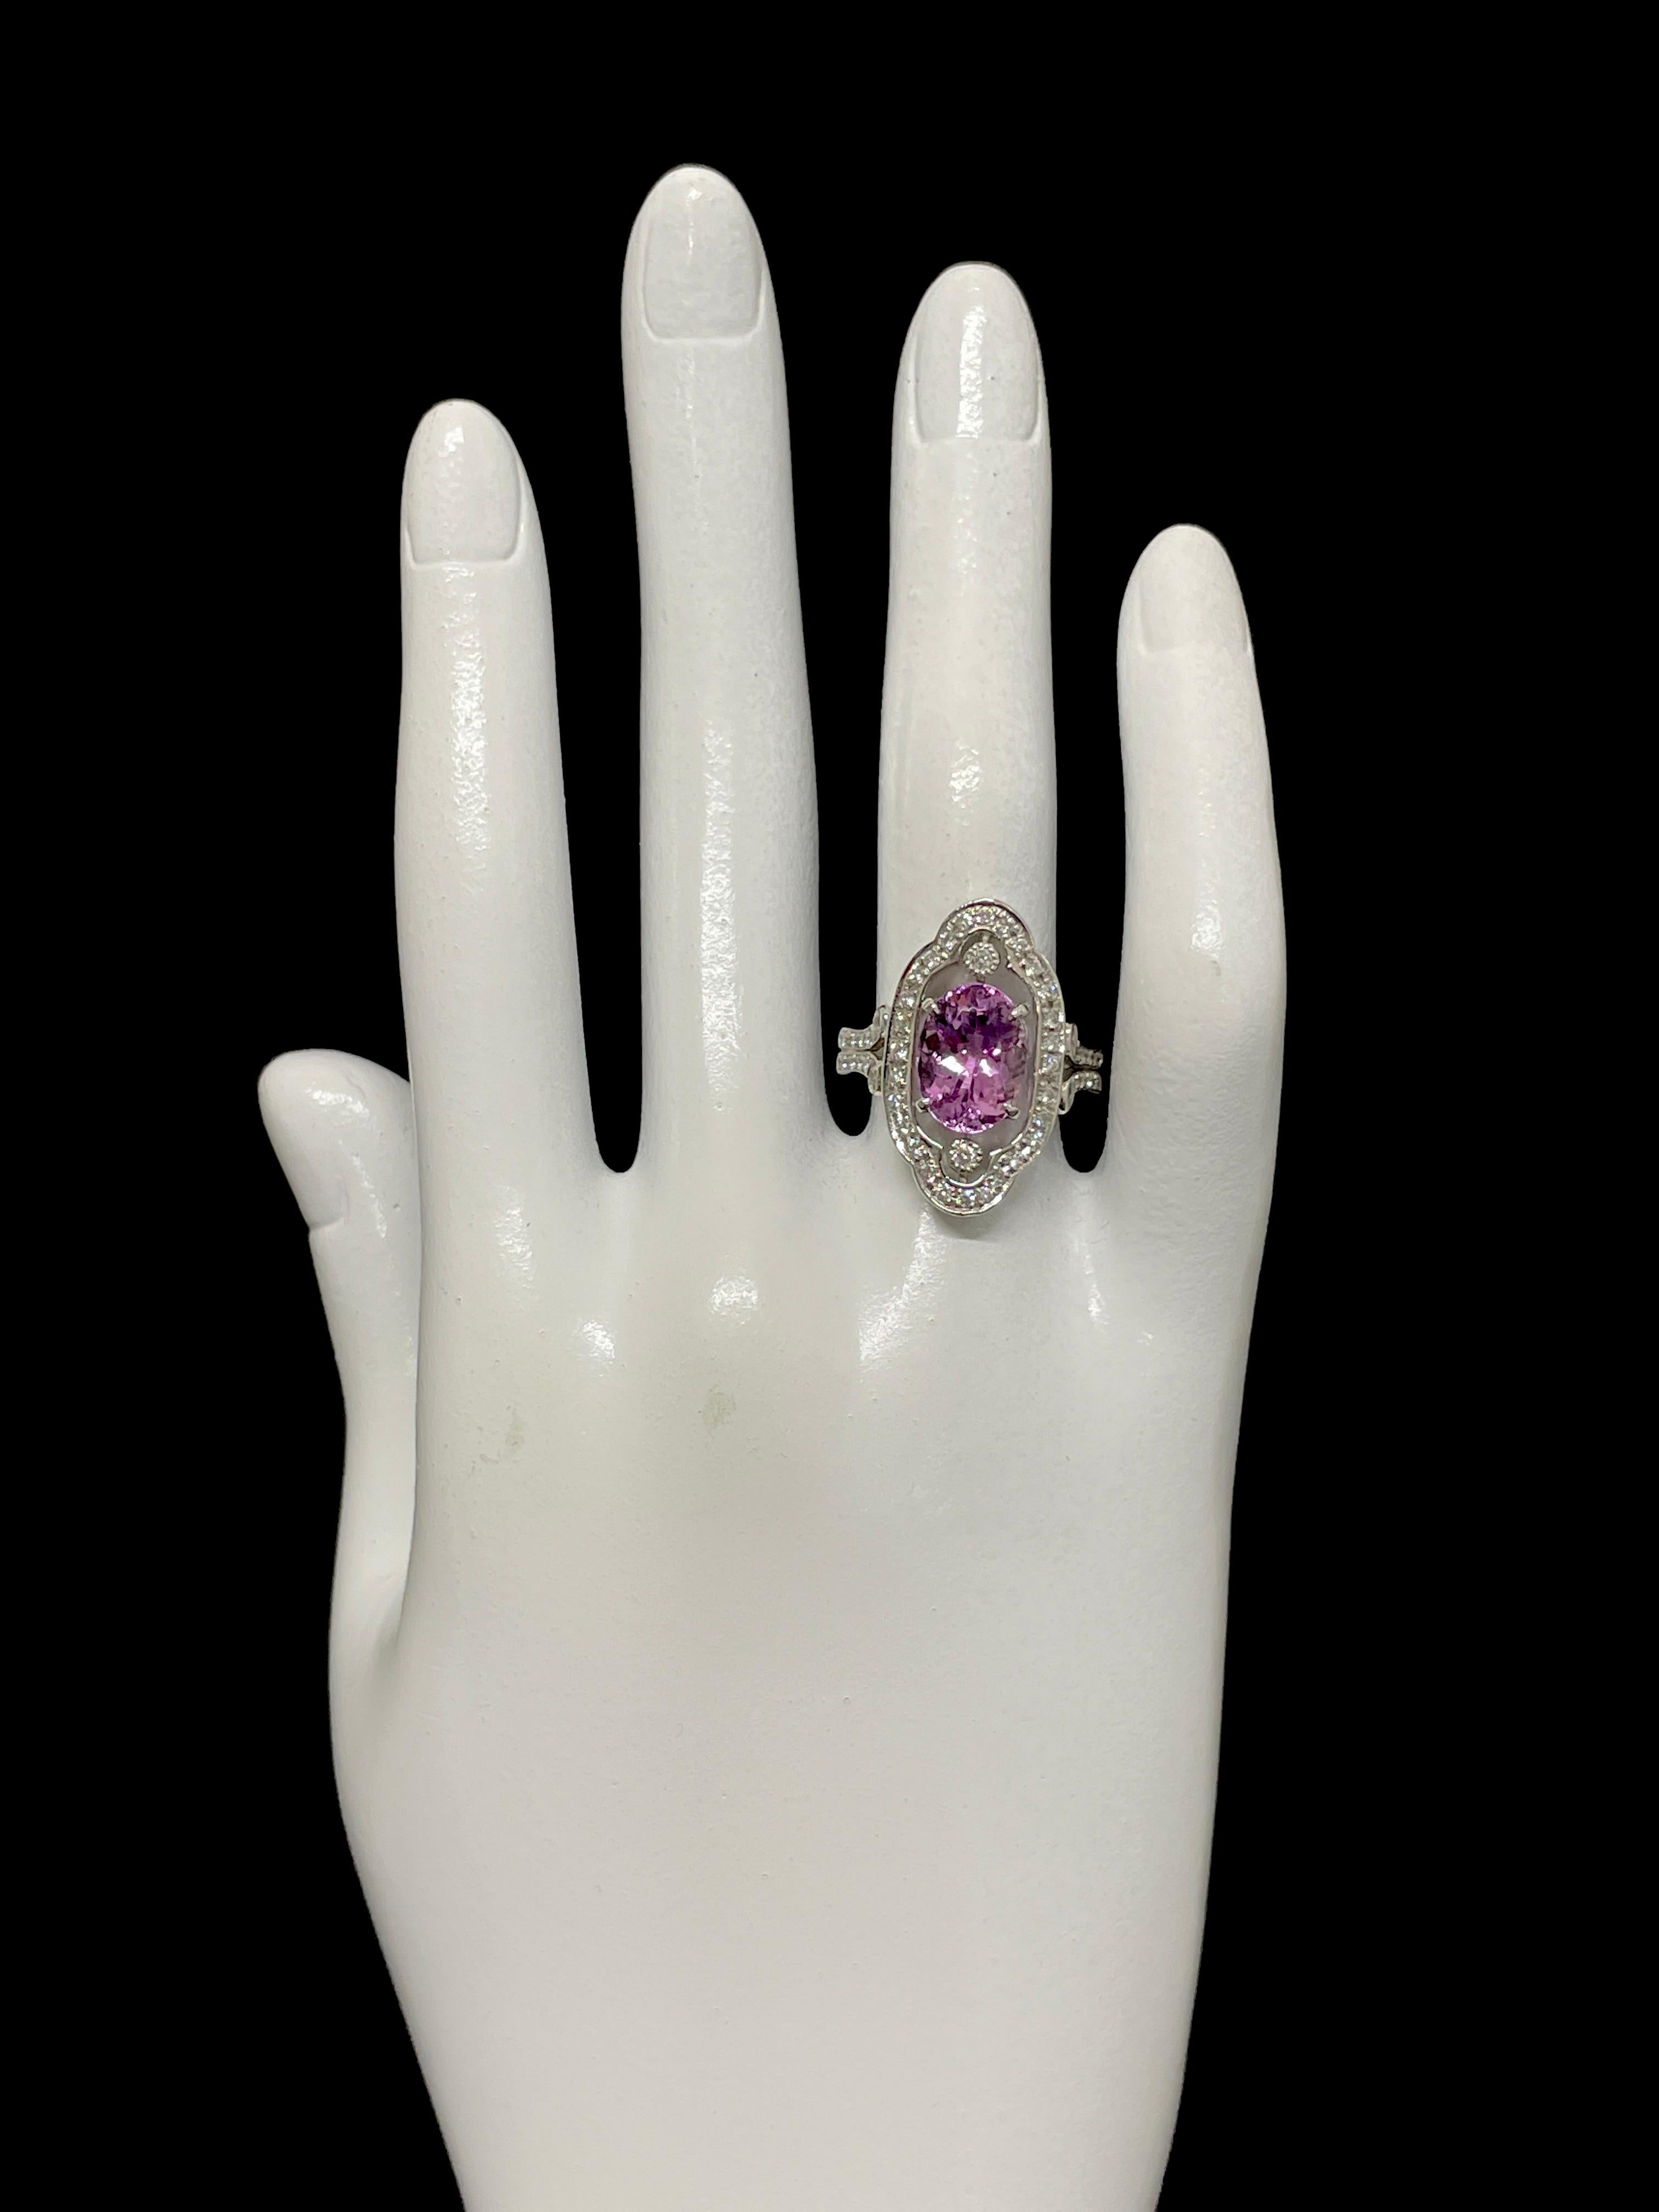 Art Deco Style 4.15 Carat Natural Pink Topaz and Diamond Ring Set in Platinum 2